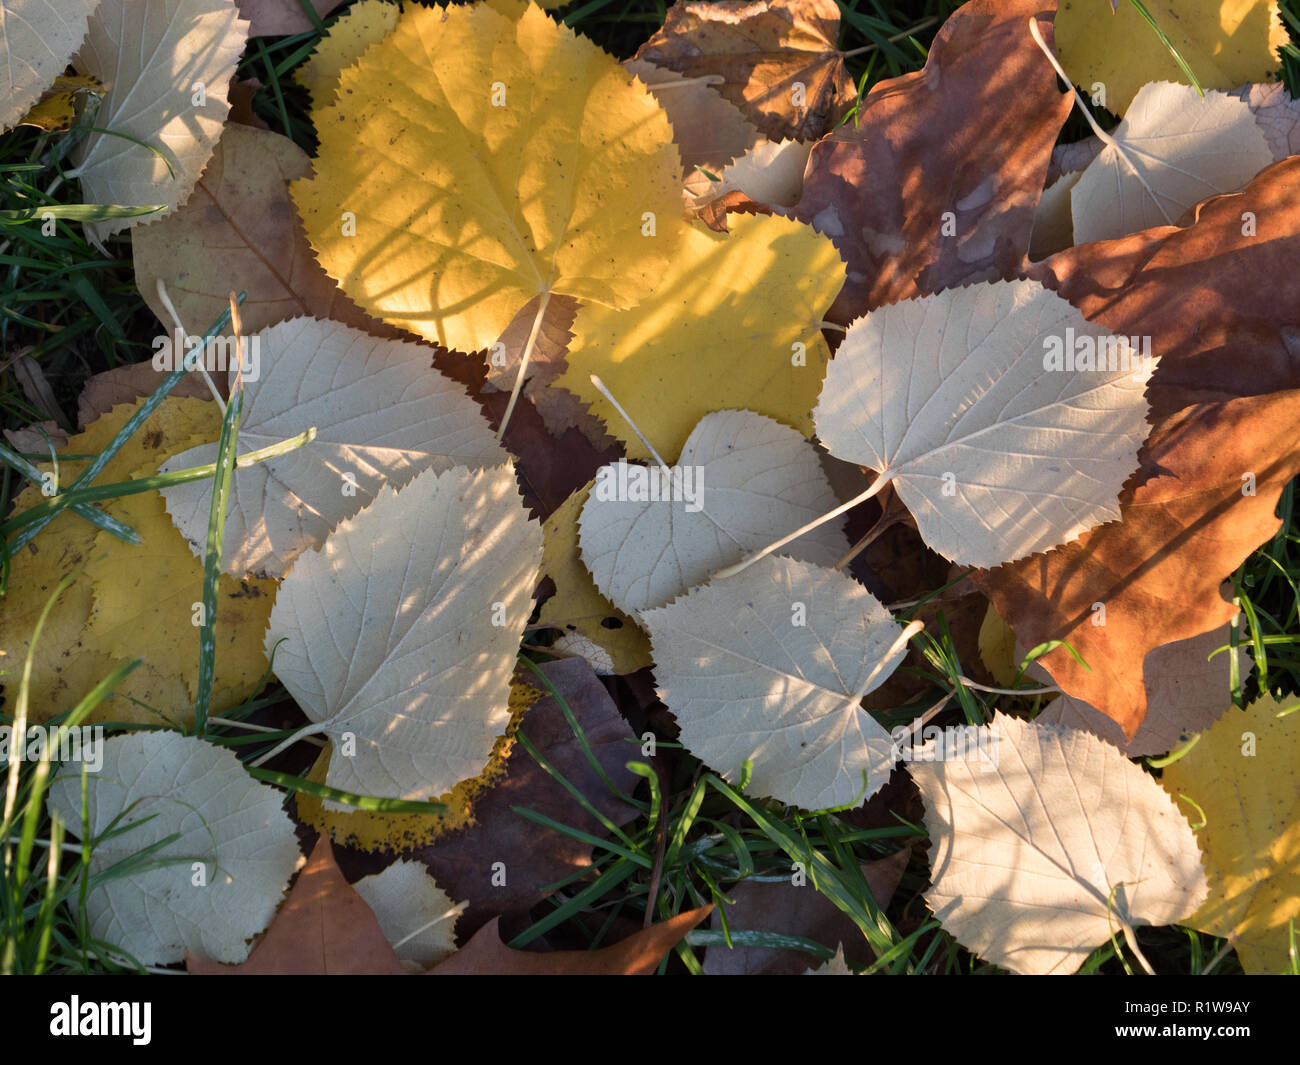 Yellow leaves seen in autumn  on the ground. Stock Photo